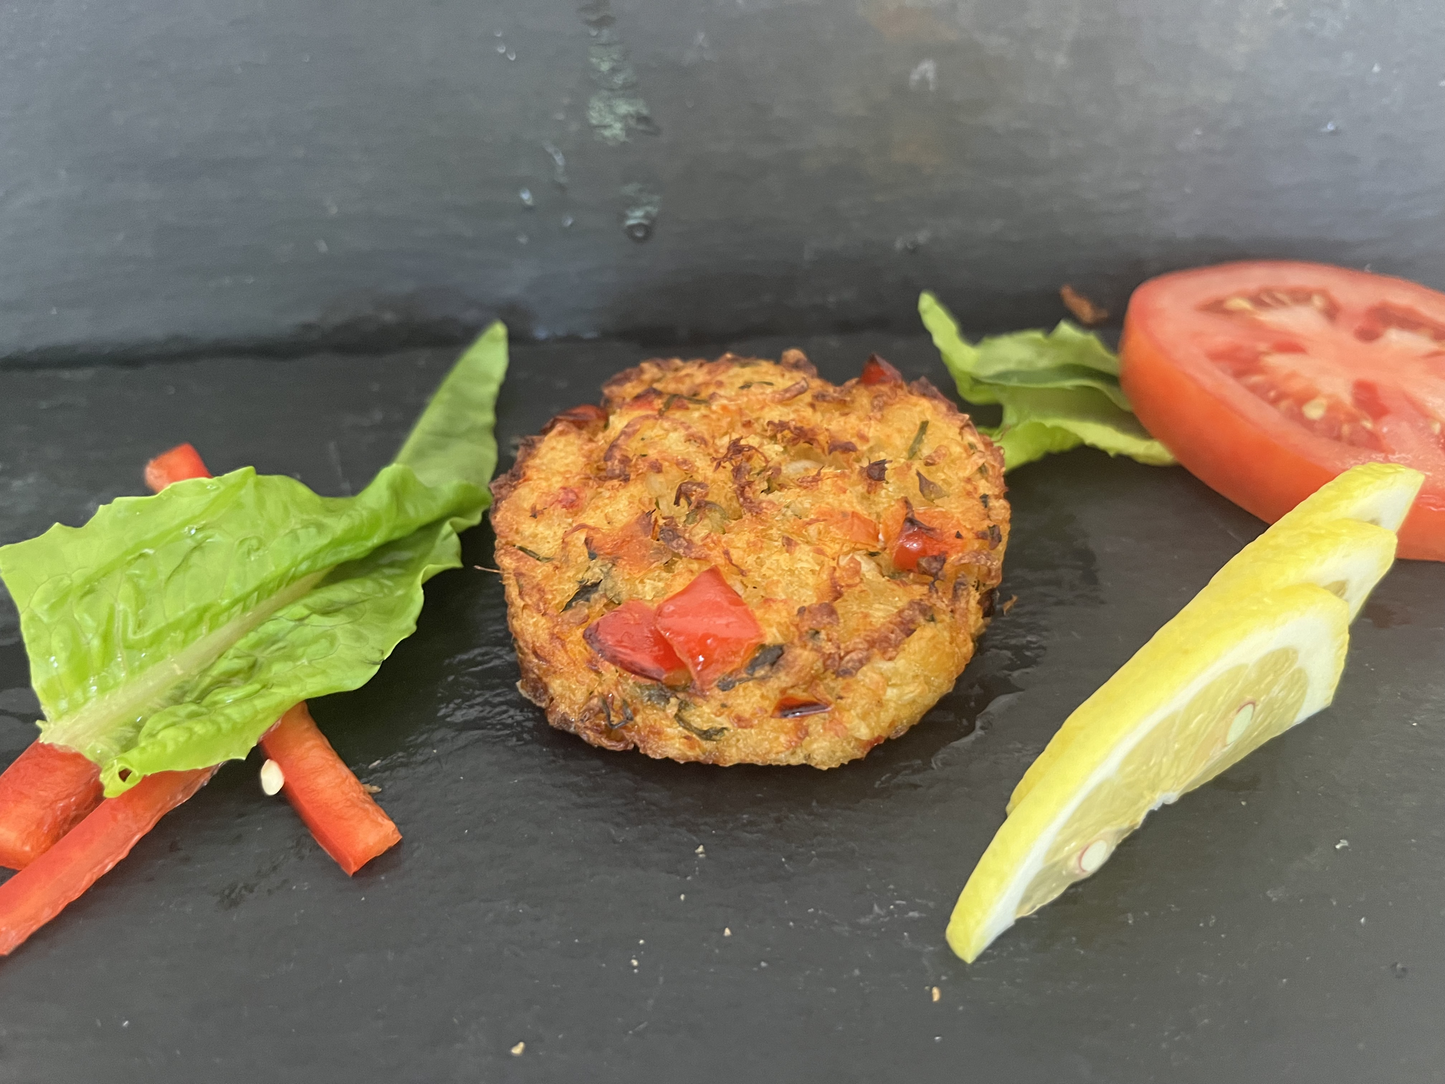 Wild Gourmet Seafood-Style Crab Cakes (71g x 2pieces) - Dish The Fish